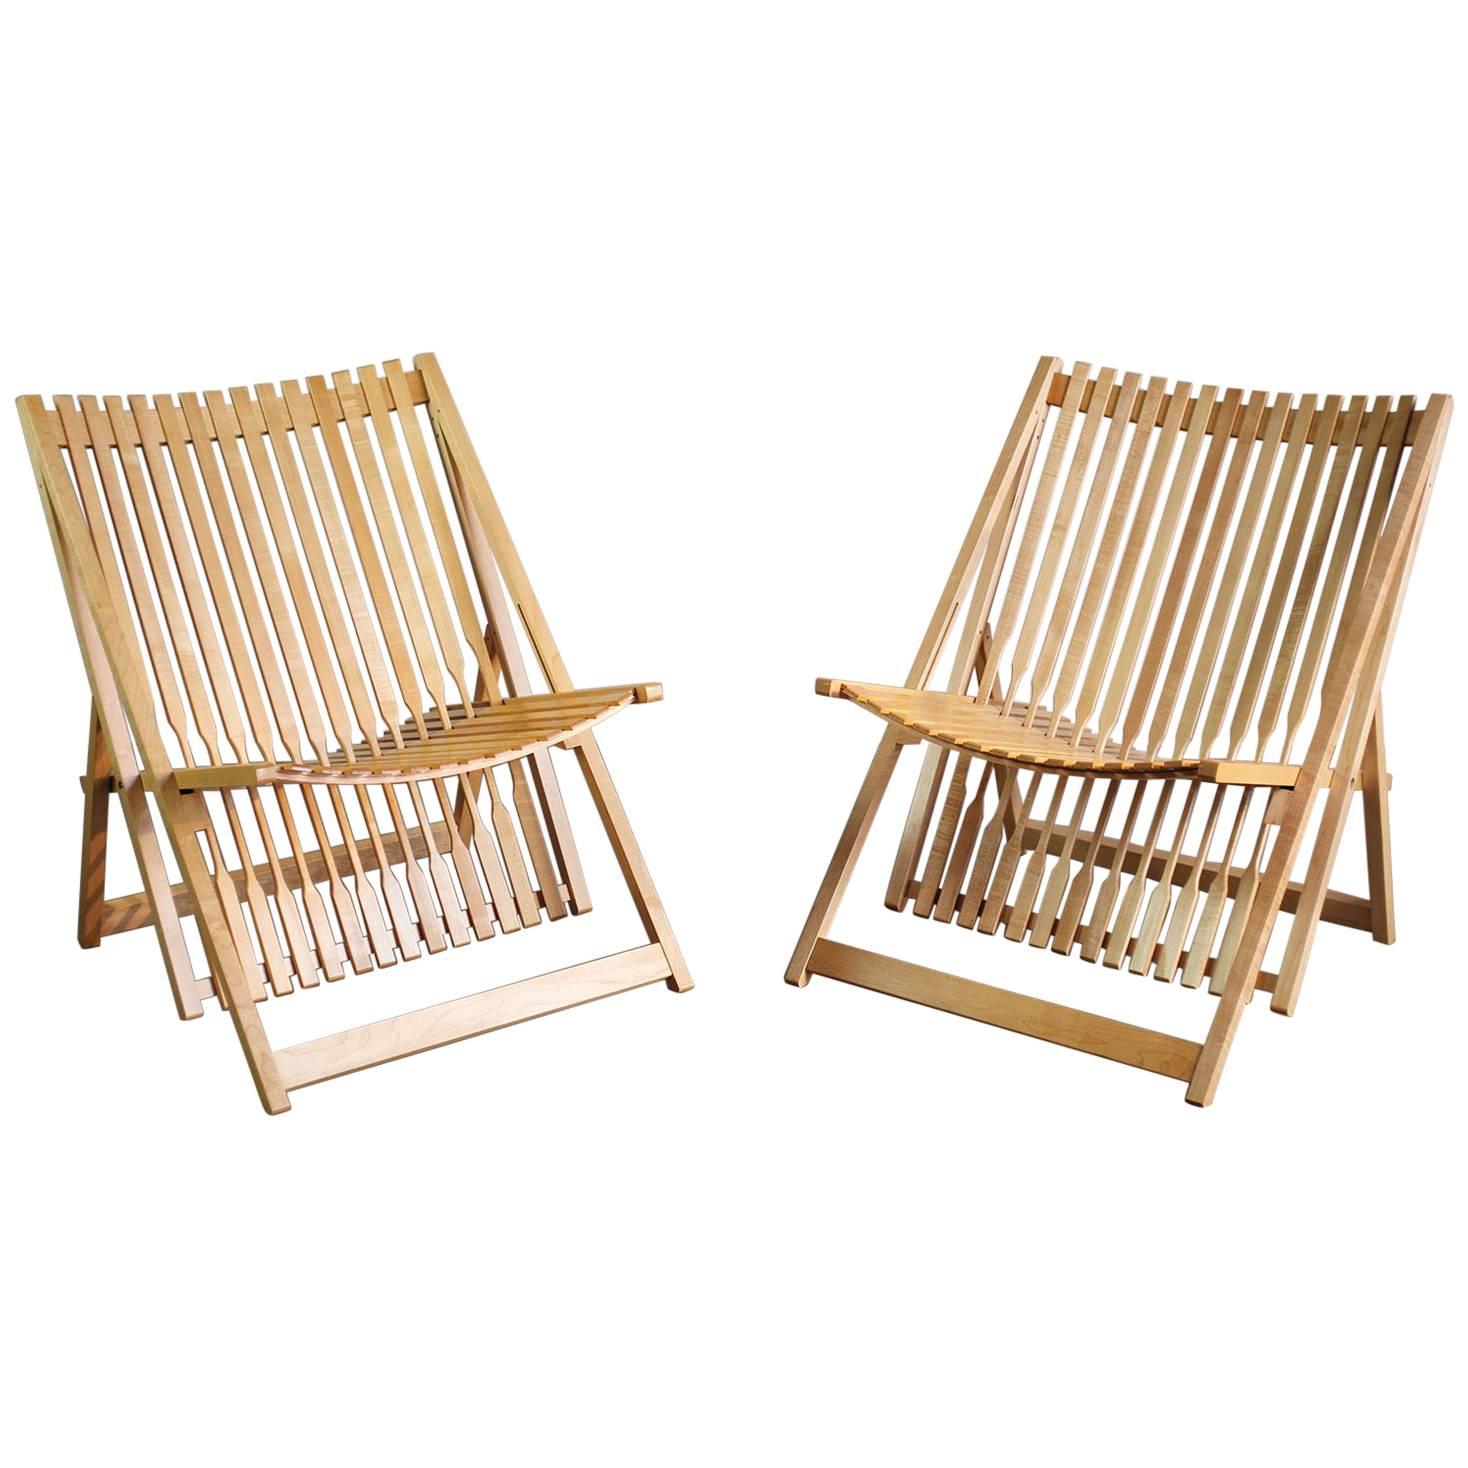 Jean-Claude Duboys, Pair of A1 Armchairs, France, 1980 For Sale